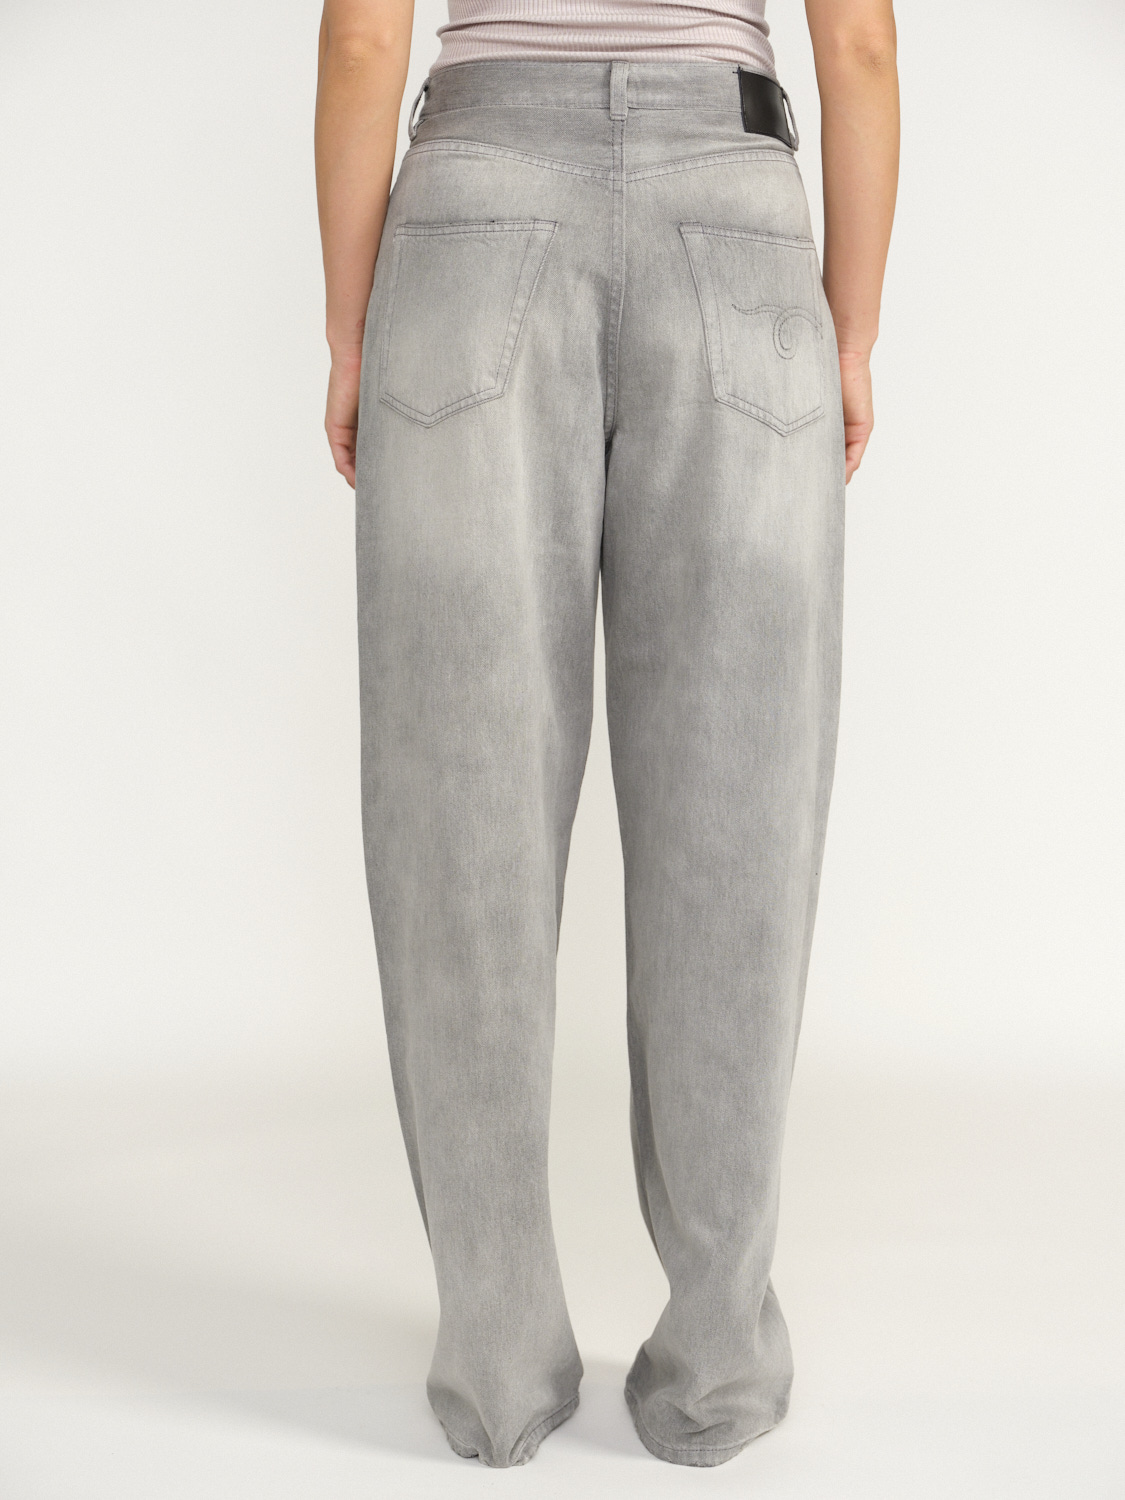 R13 Damon - Jeans trousers with pleat and flared leg grey 25